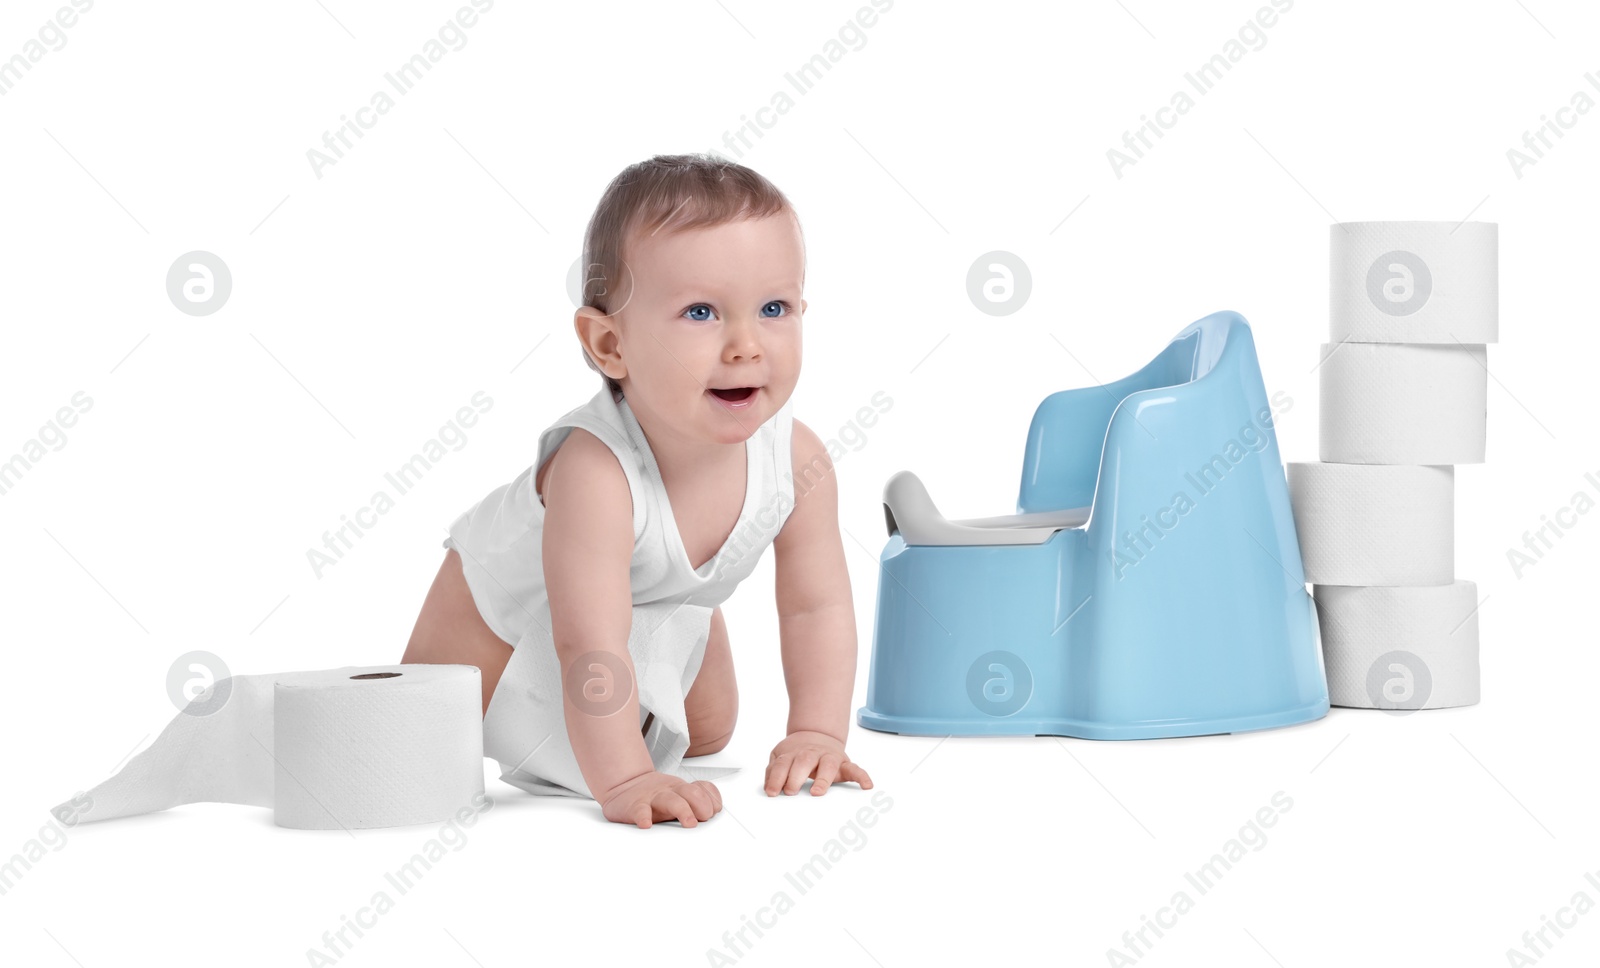 Photo of Little child near baby potty and stack of toilet paper rolls on white background